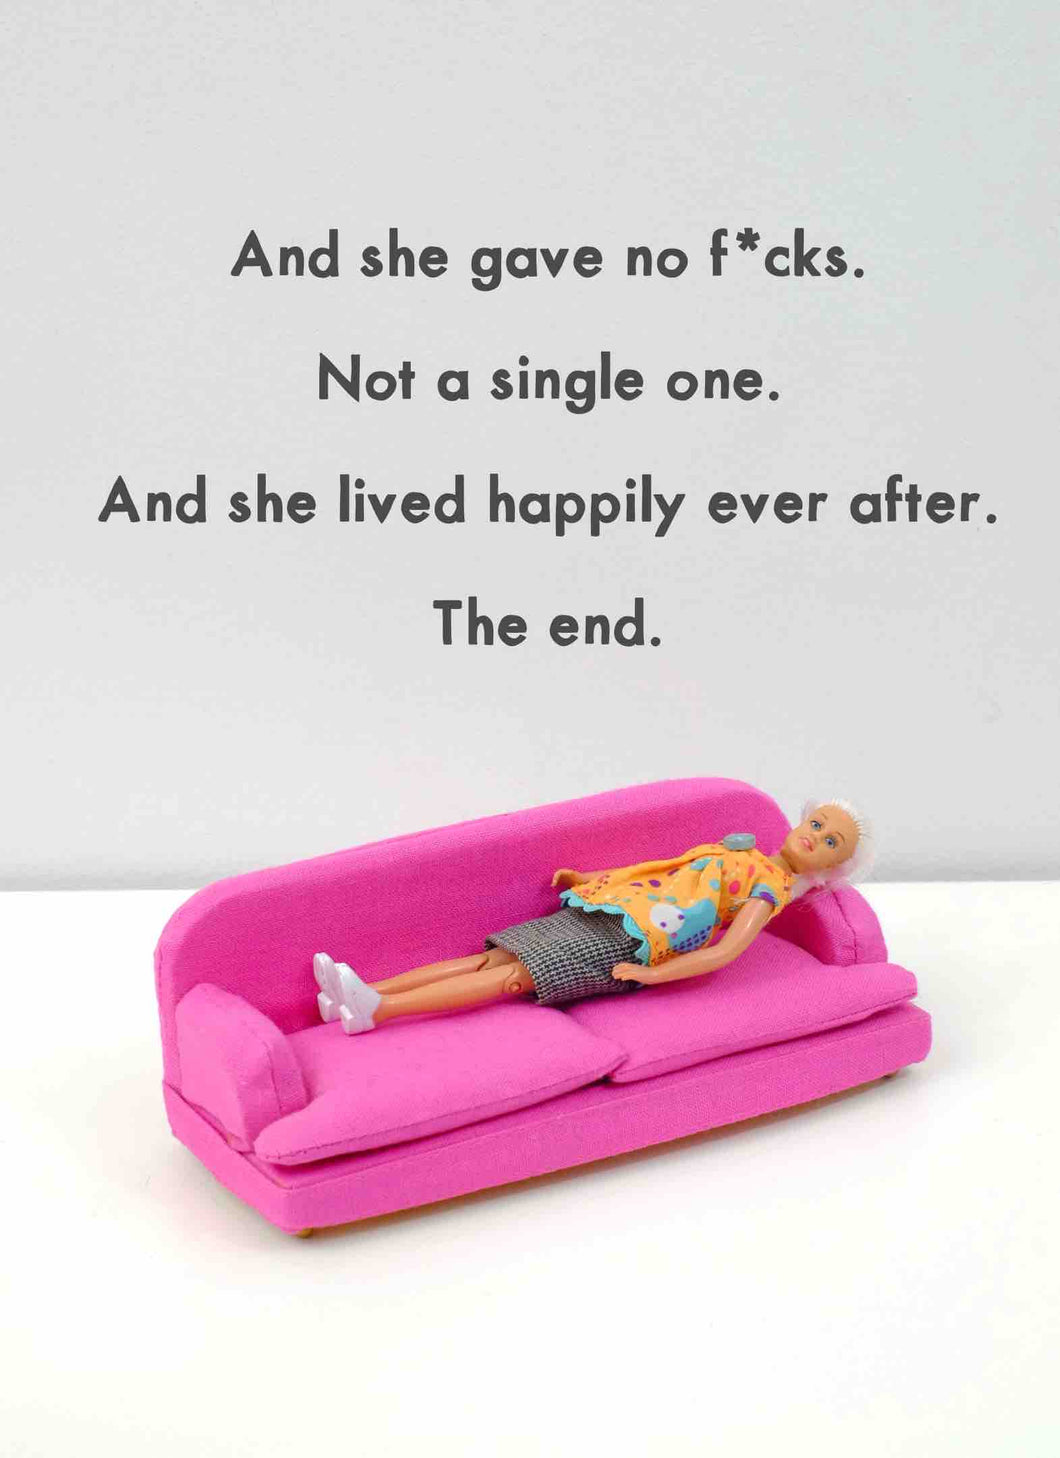 No f*cks happily ever after